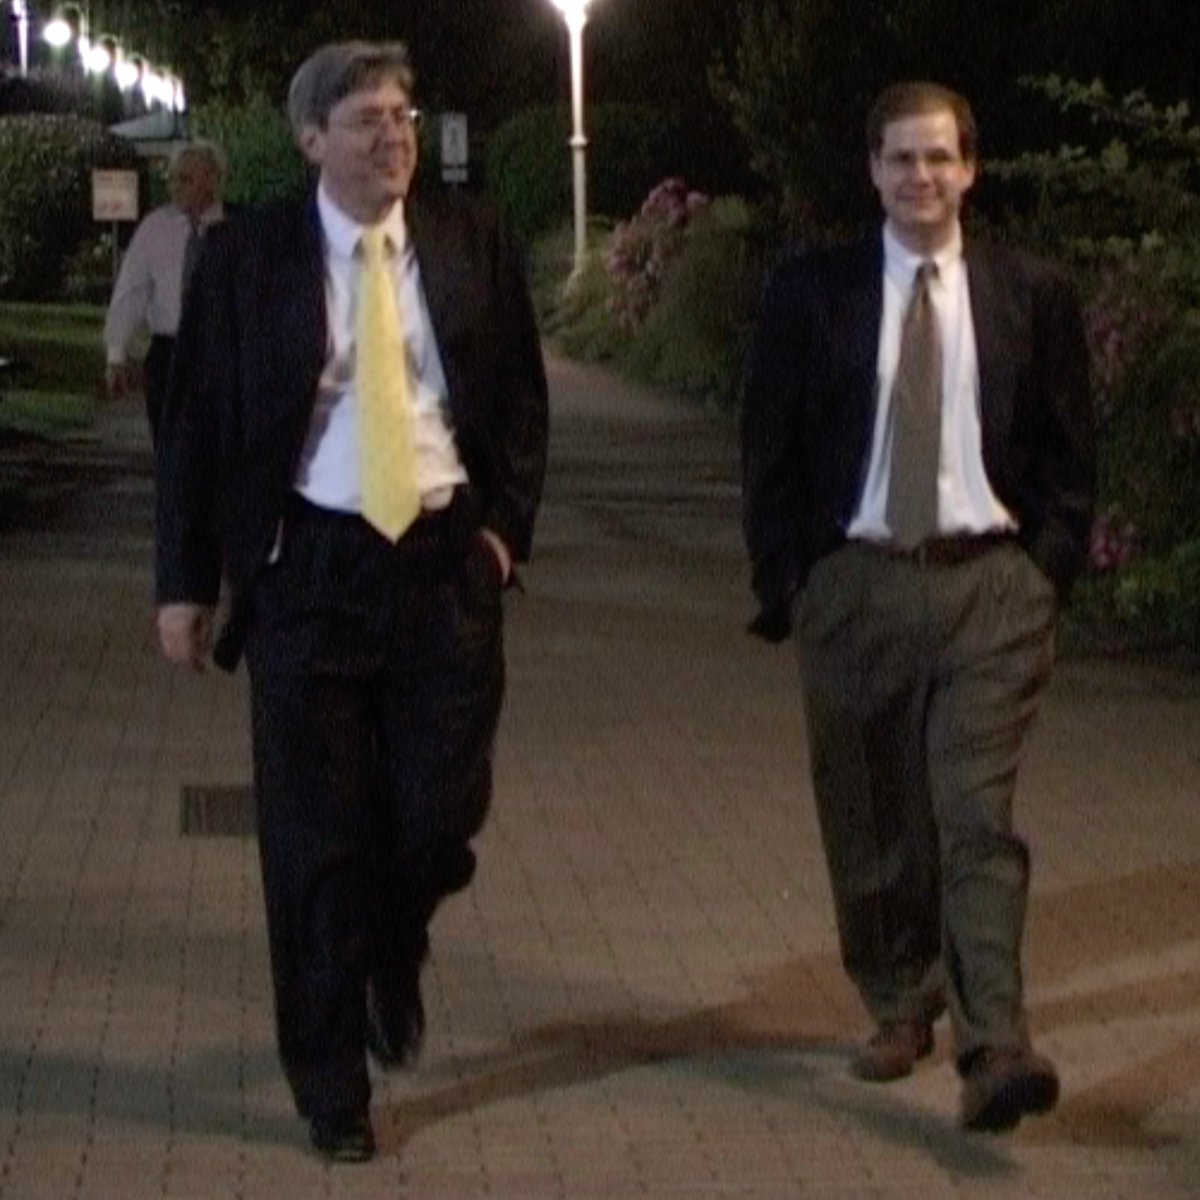 5 June 2004. Alongside Douglas Feith (left) we find the American neoconservative ideologue from the CFR, Max Boot (right), who was in Stresa to co-host a session entitled 'European Geopolitics', along with European Commissioners Antonio Vitorino and Frits Bolkestein. #Bilderberg